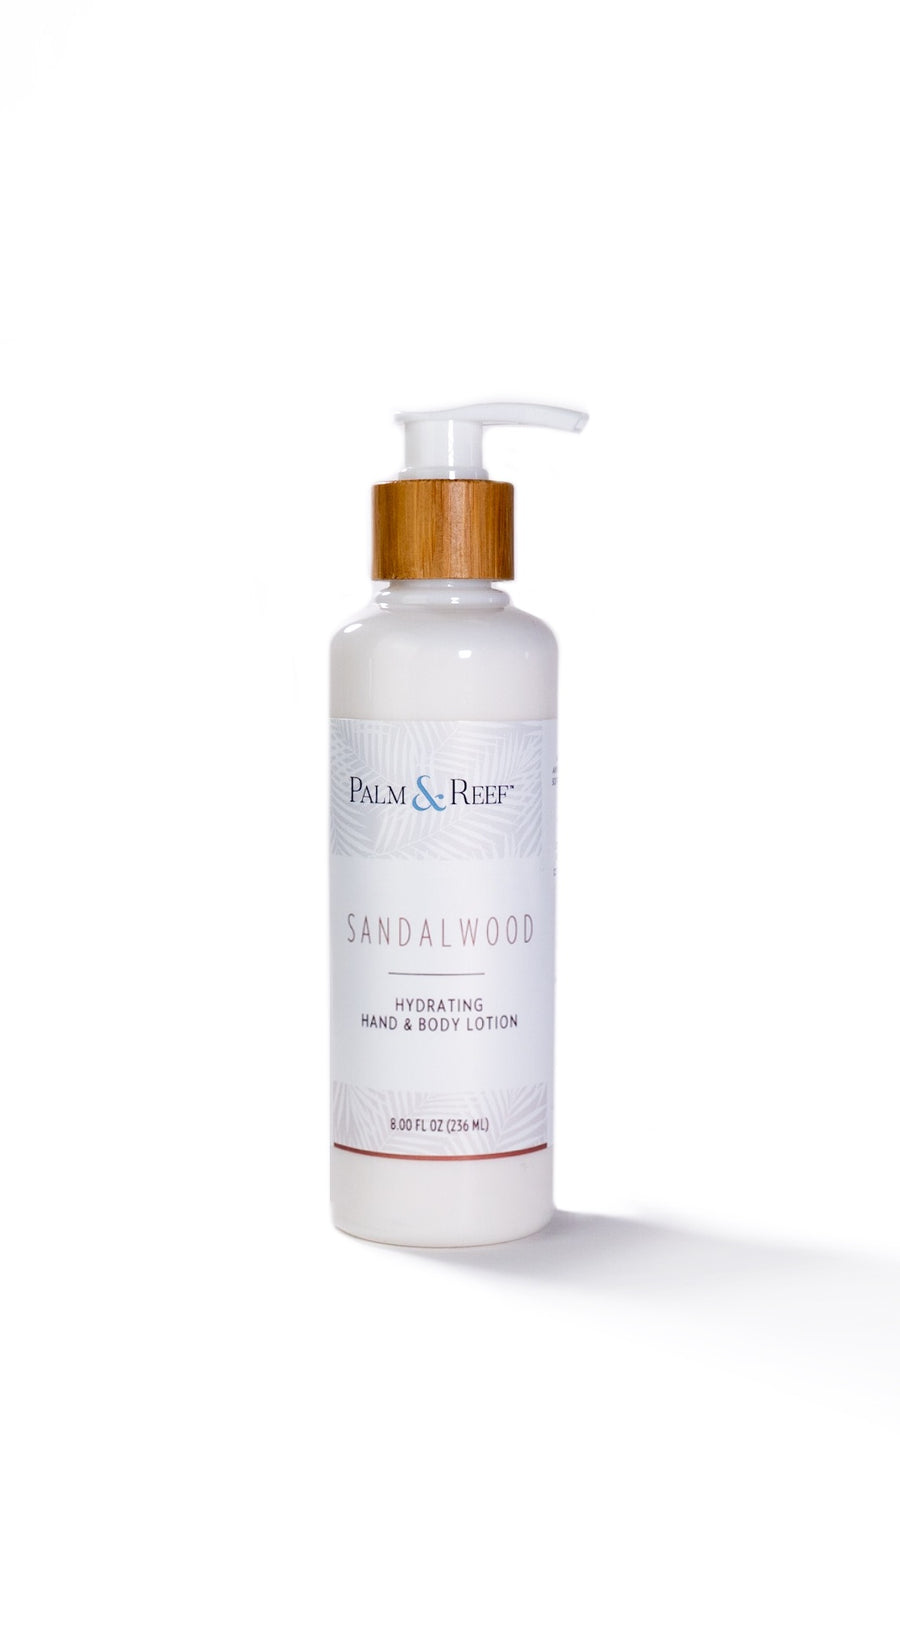 Hand & Body Lotion by Palm & Reef